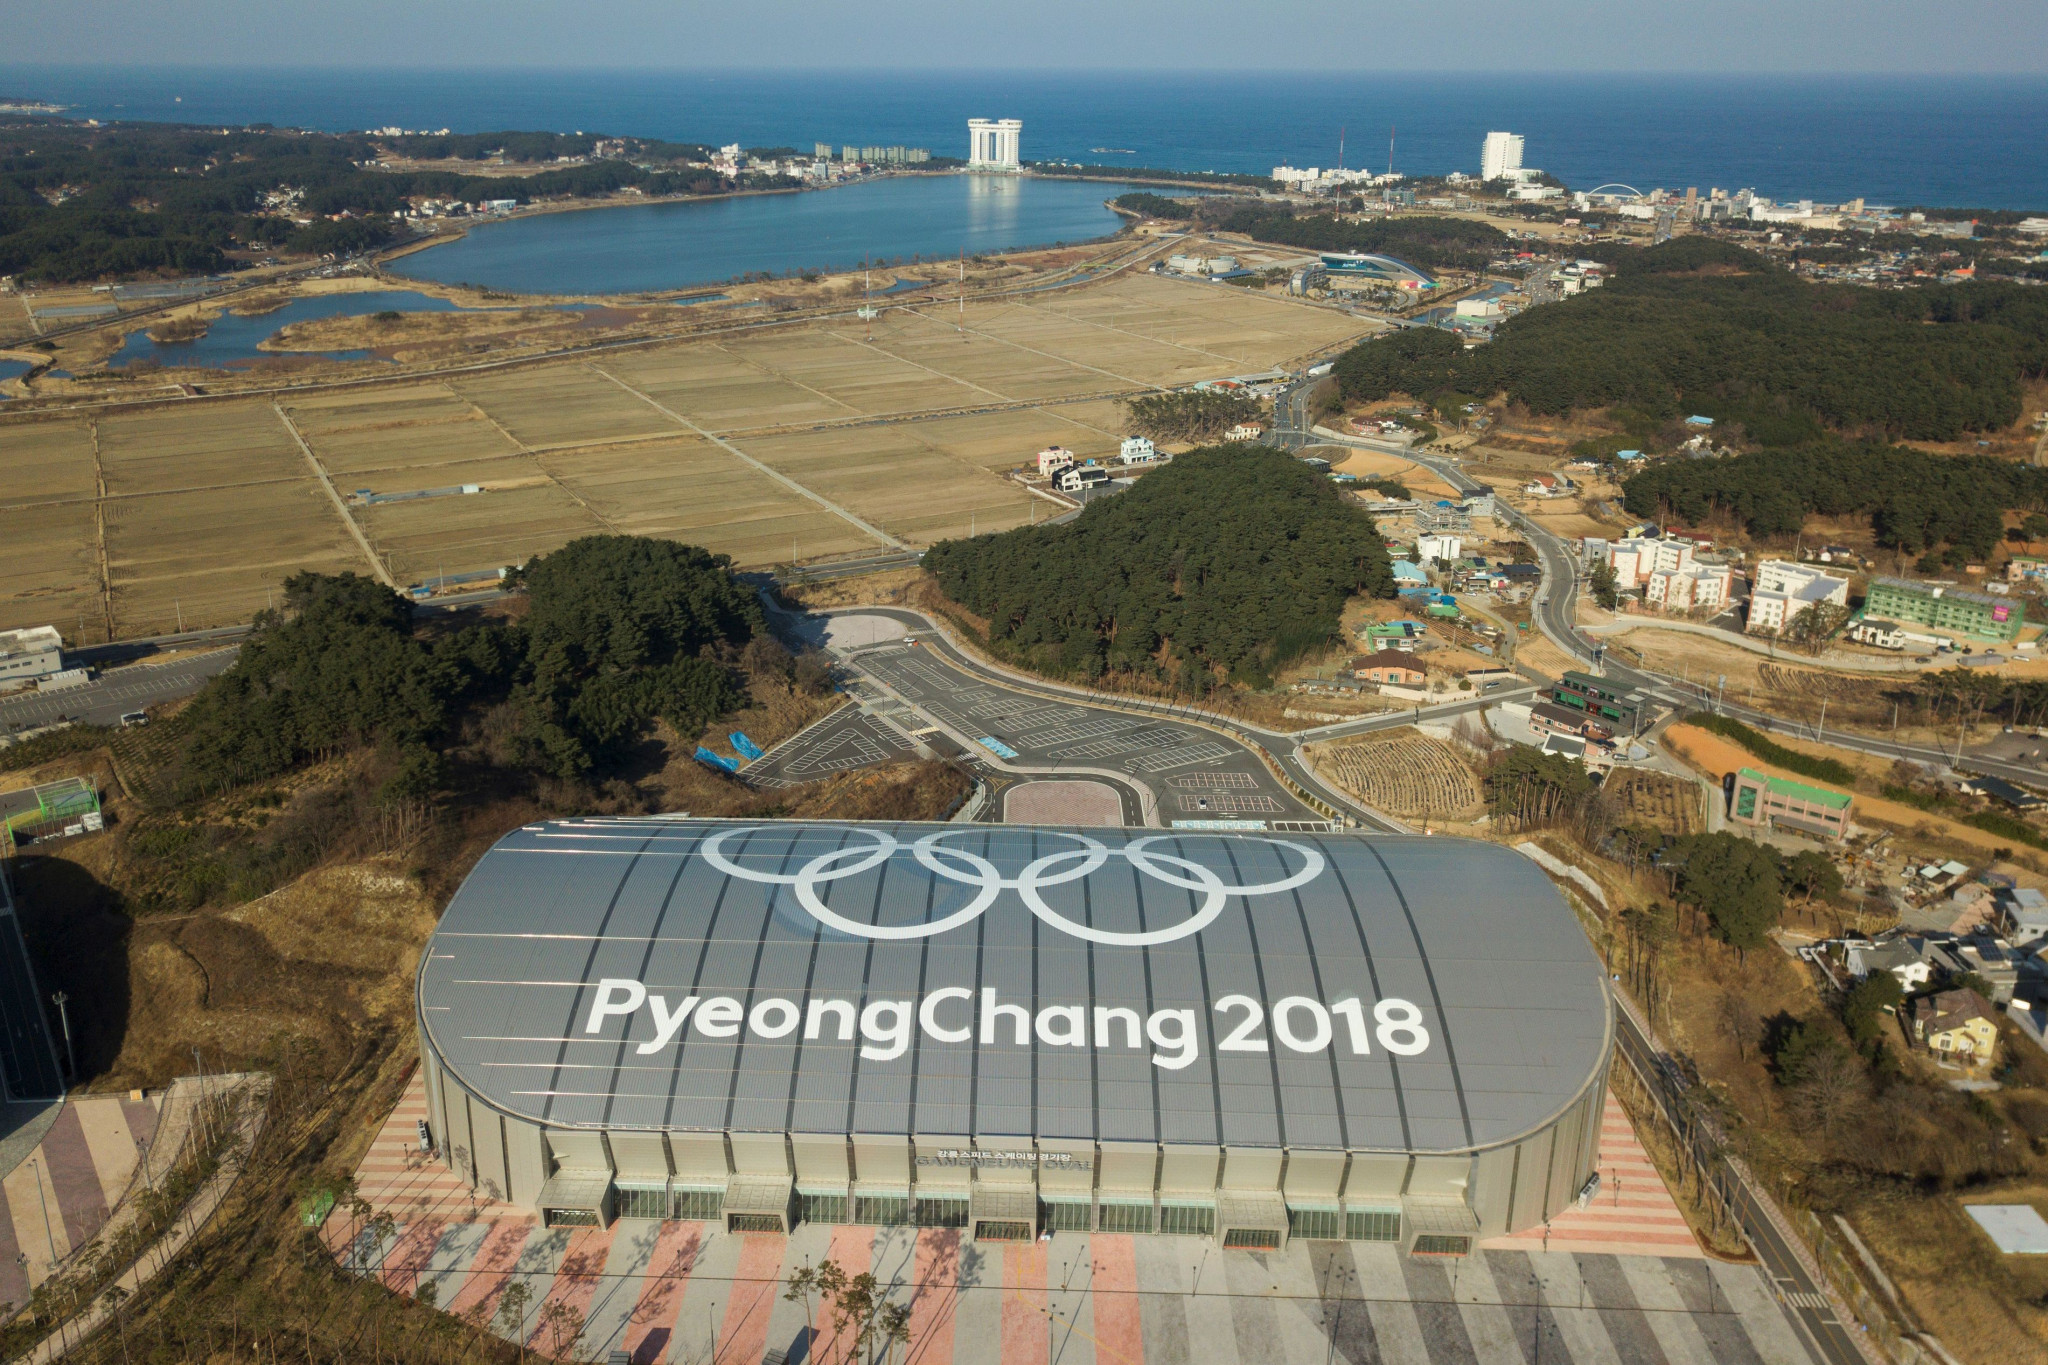 A long-term future for the facilities built for Pyeongchang 2018, including the Gangneung Oval, where the speed skating was held, has been promised by Thomas Bach, despite there currently being no legacy plan in place ©Getty Images